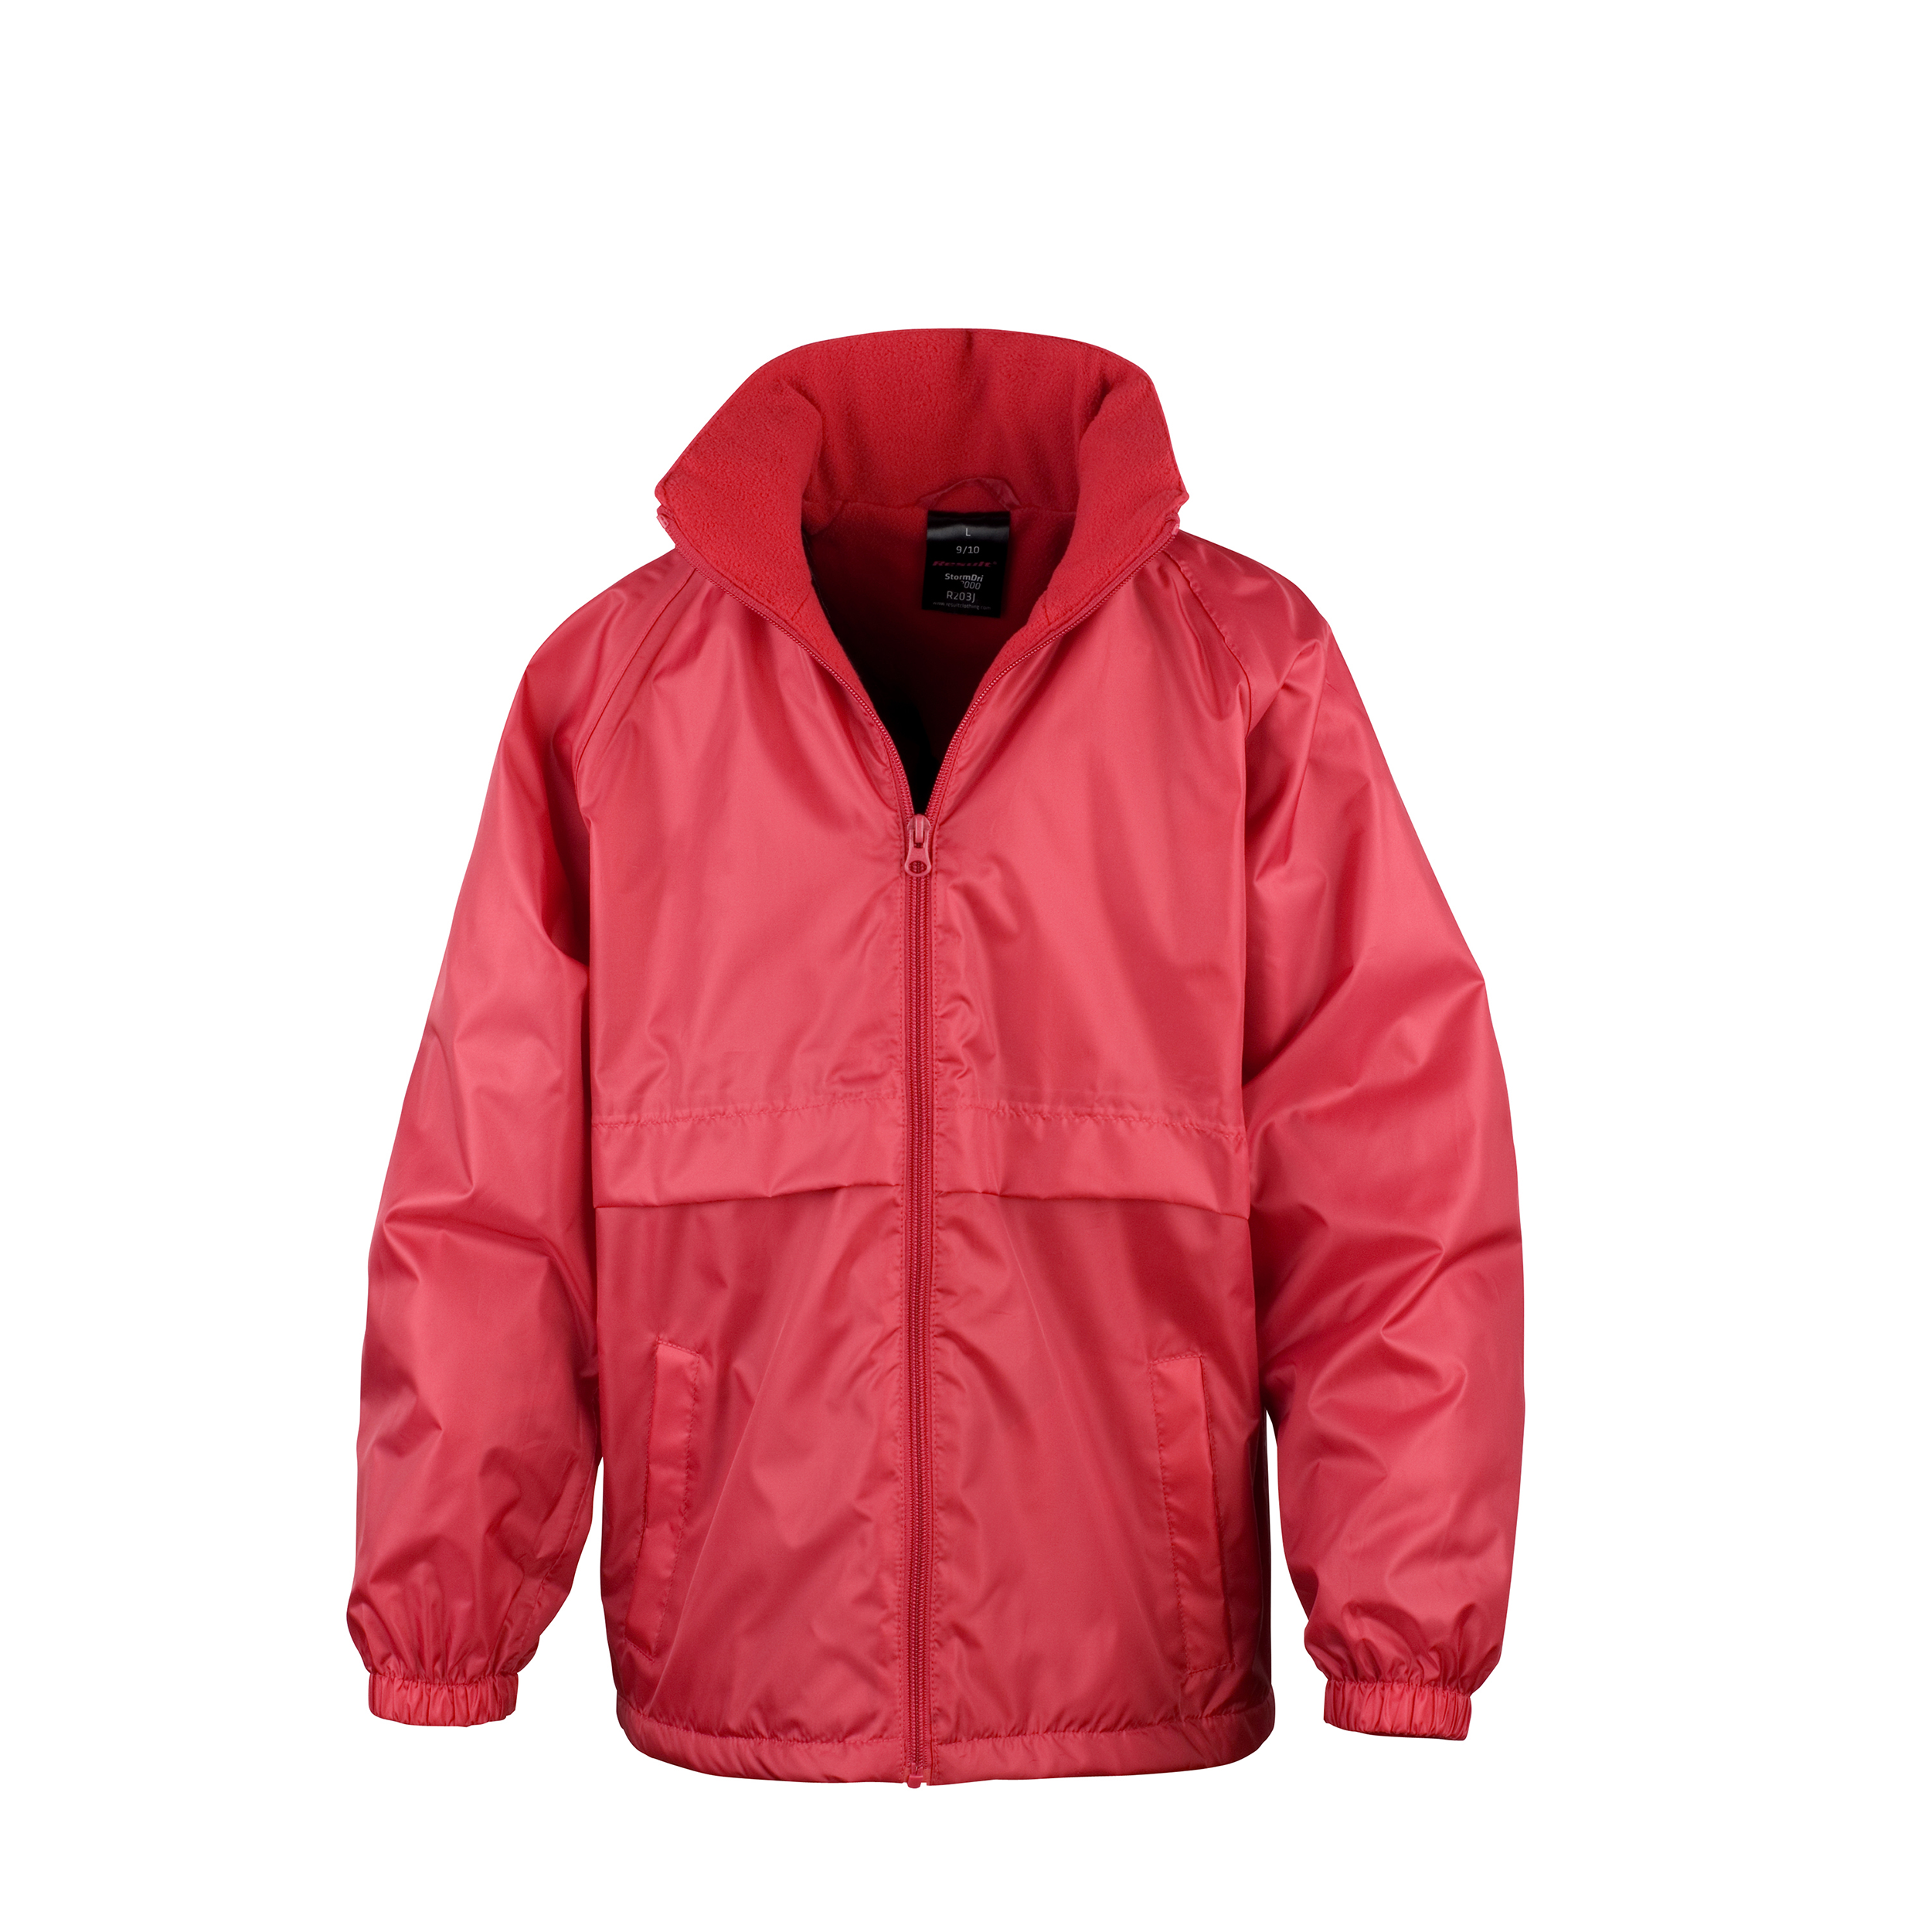 Result Youth Core Light Jacket - R203B